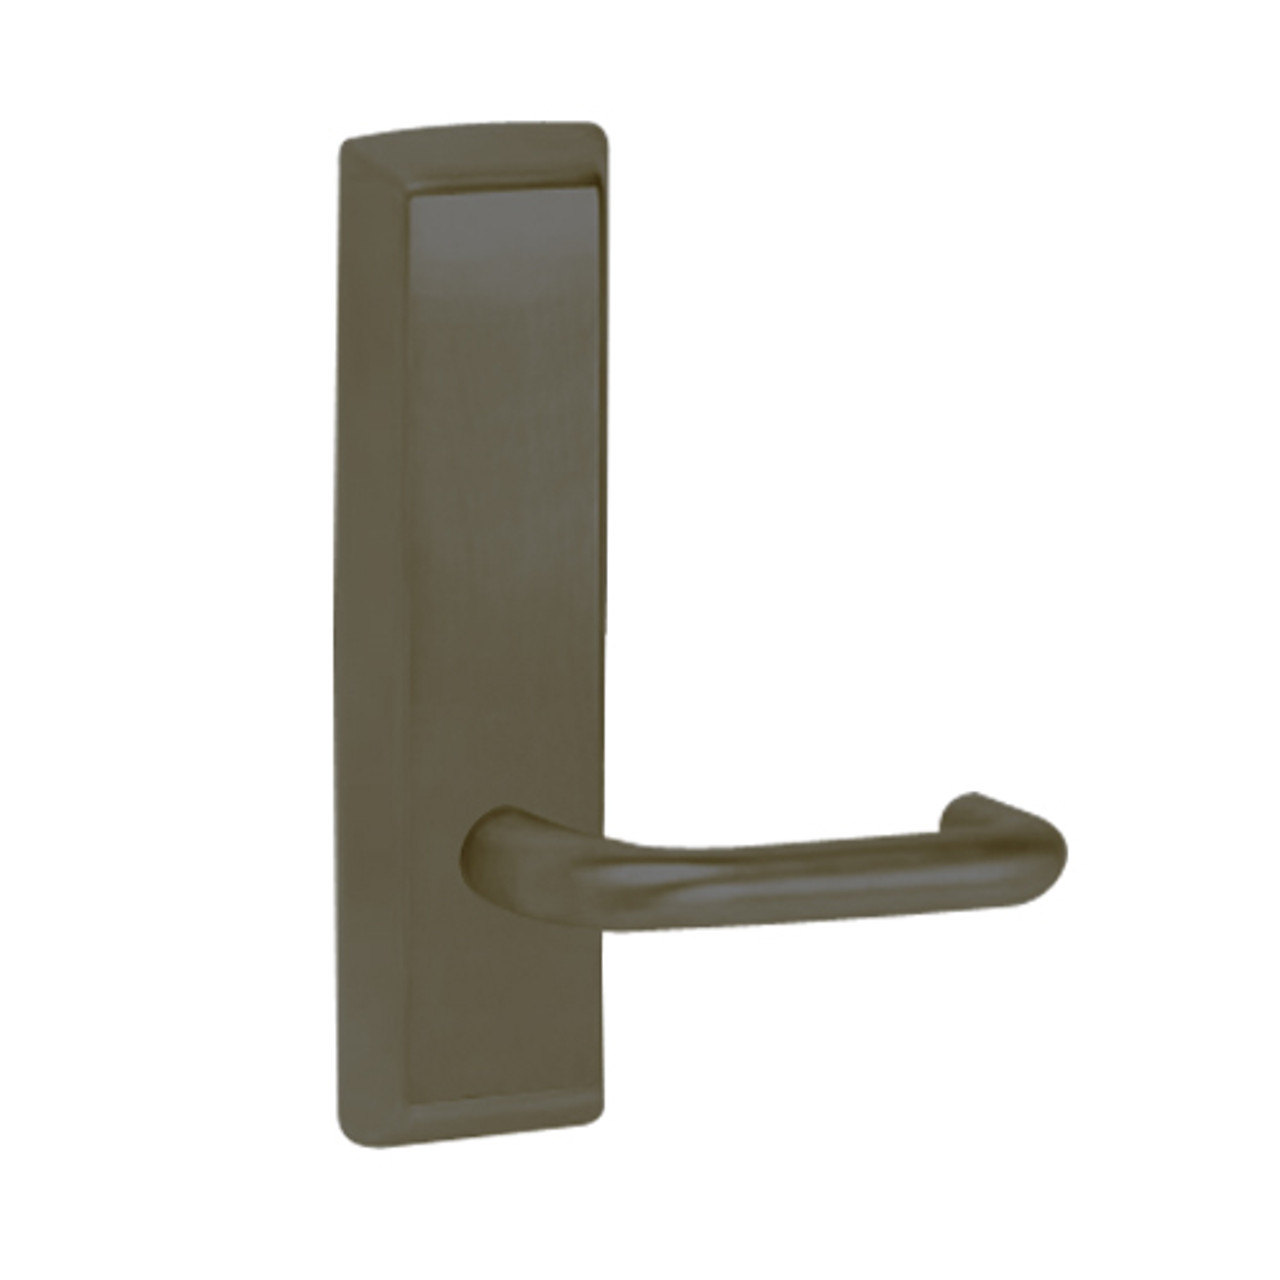 L955-613-LHR Corbin ED5000 Series Exit Device Trim with Classroom Lustra Lever in Oil Rubbed Bronze Finish